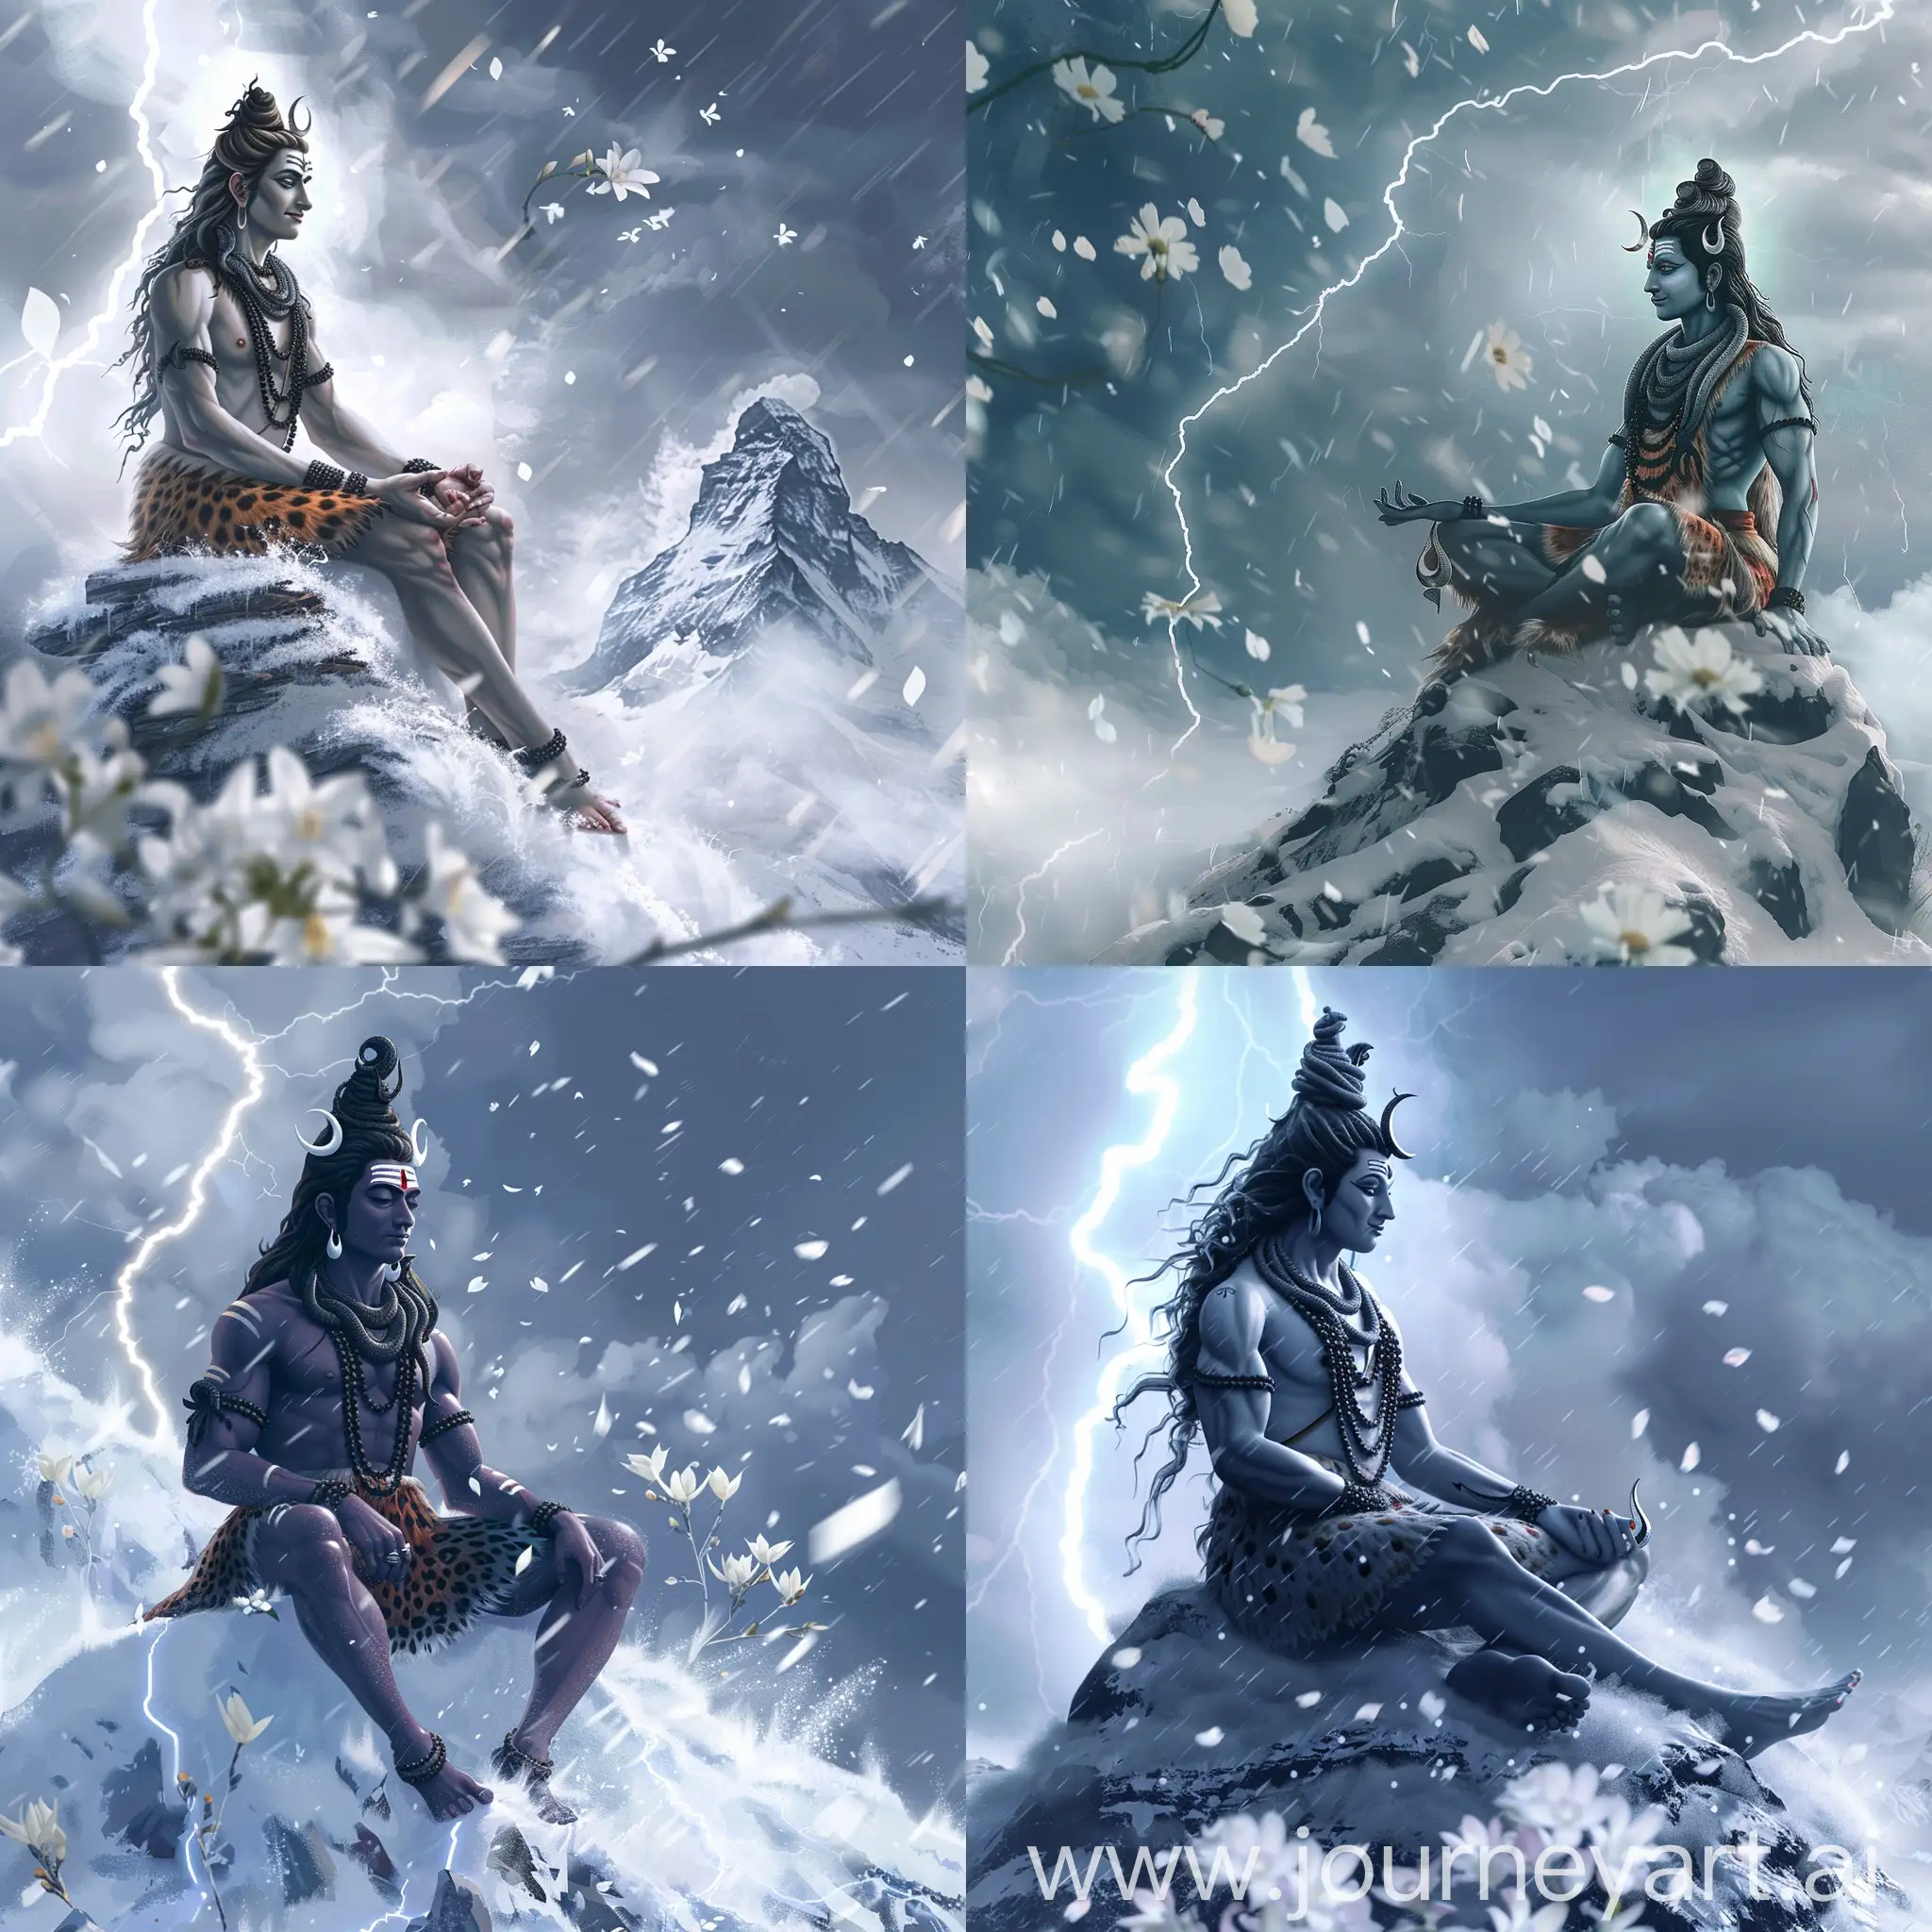 Majestic-Lord-Shiva-Amidst-Snowy-Peaks-with-Divine-Lightning-and-Falling-White-Petals